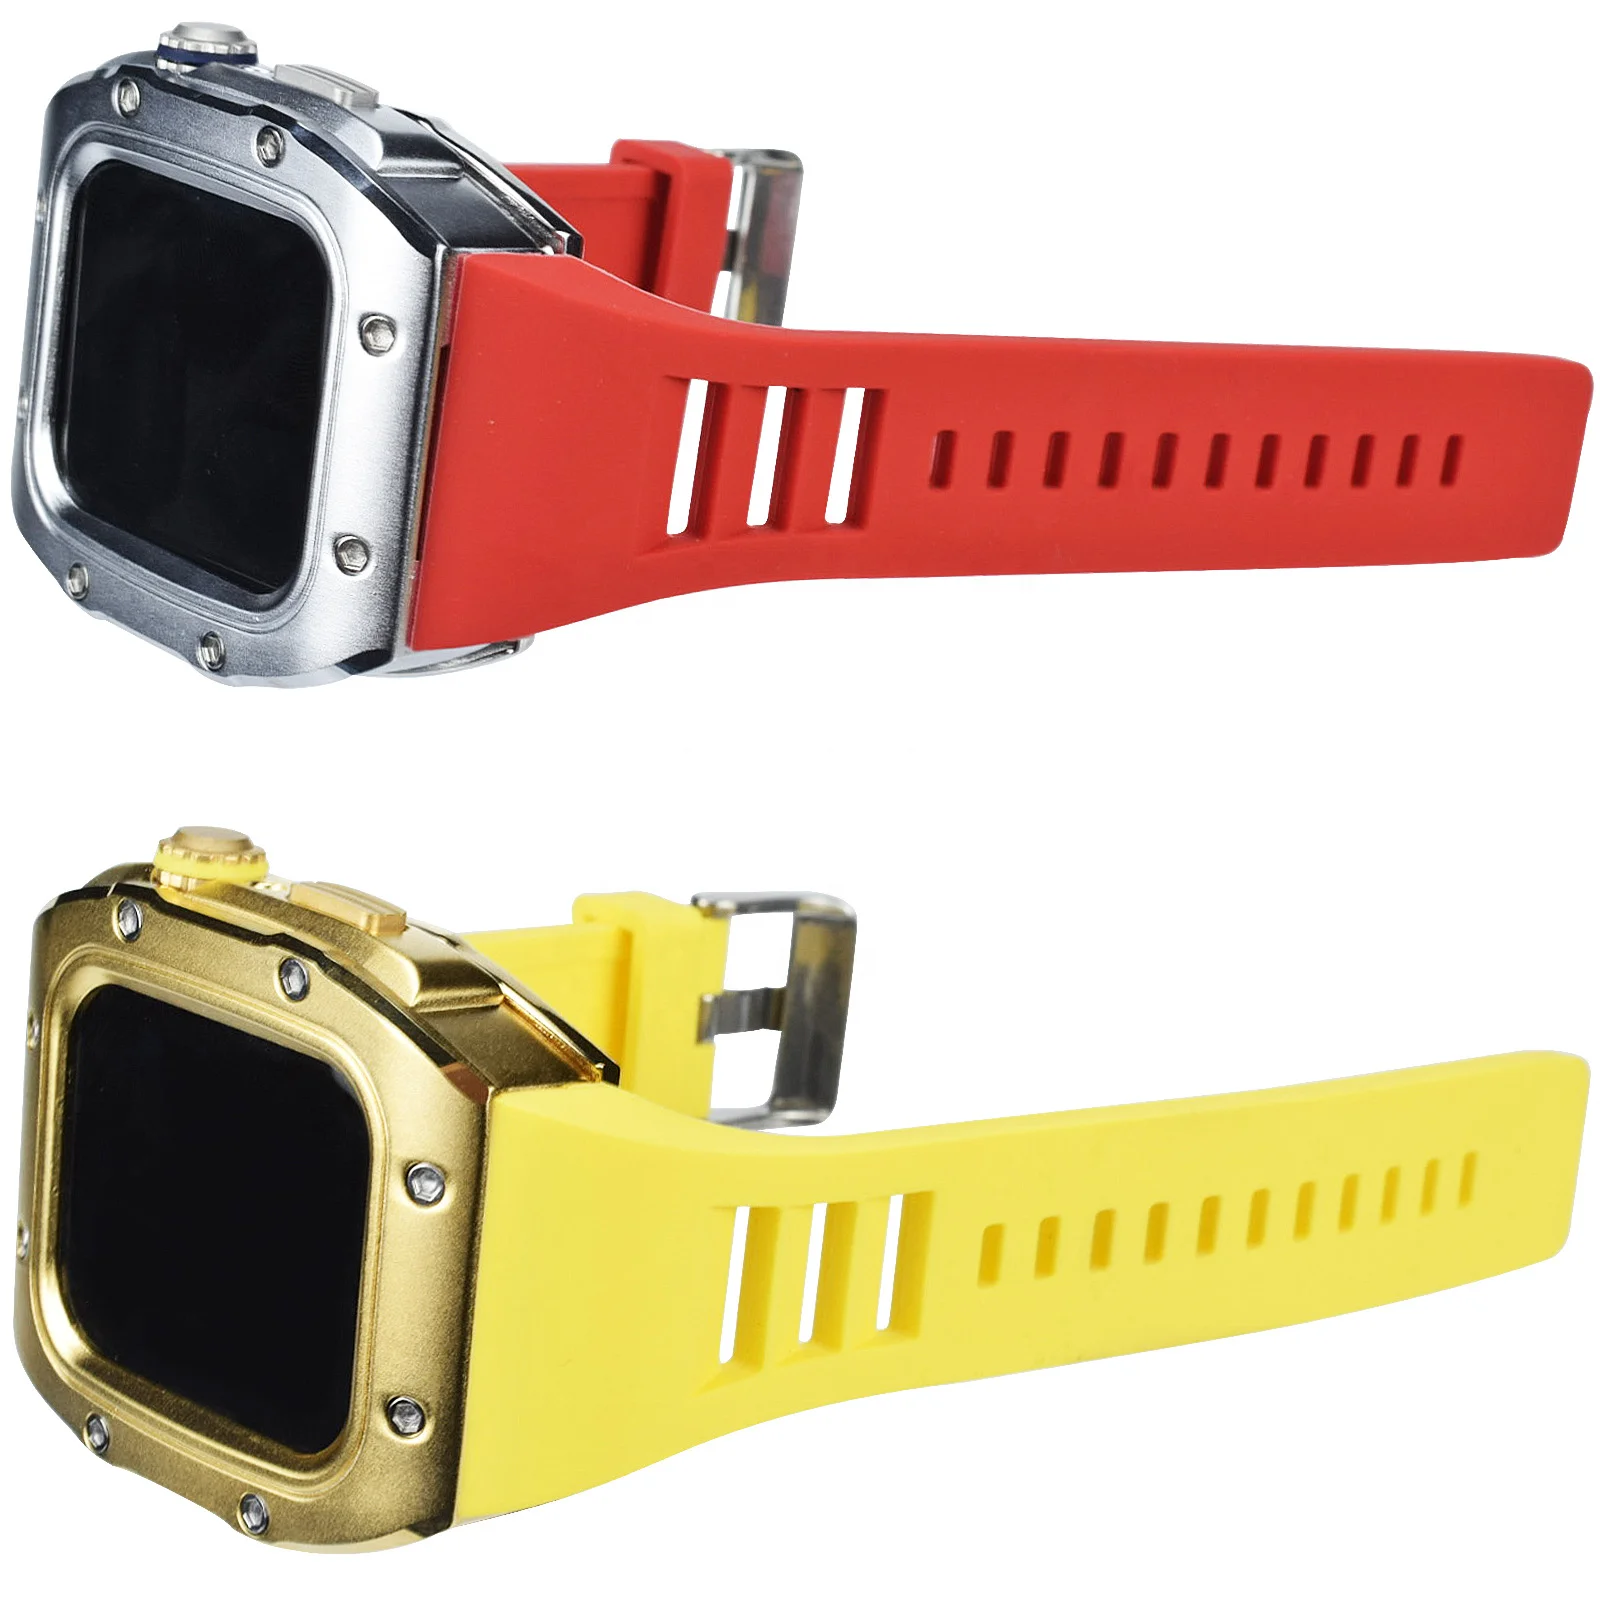 

New Arrival Silicone Band Rubber Strap Used 44mm 45mm Cover Luxury Metal Watch Case For Apple Smart Iwatch Series 6/7, Black ,white ,red ,yellow